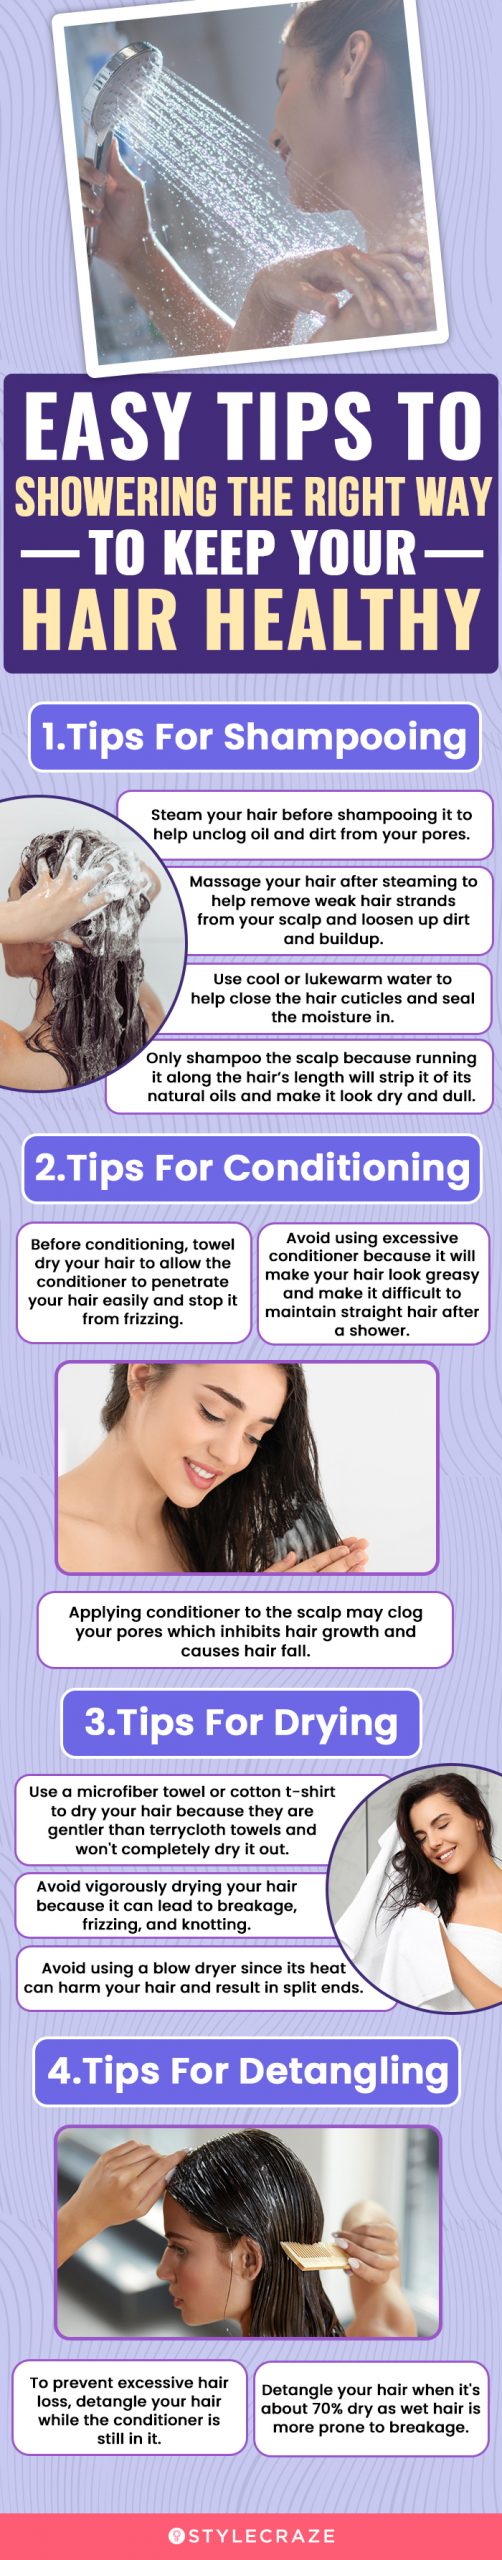 How To Take A Shower The Right Way To Keep Your Hair Healthy